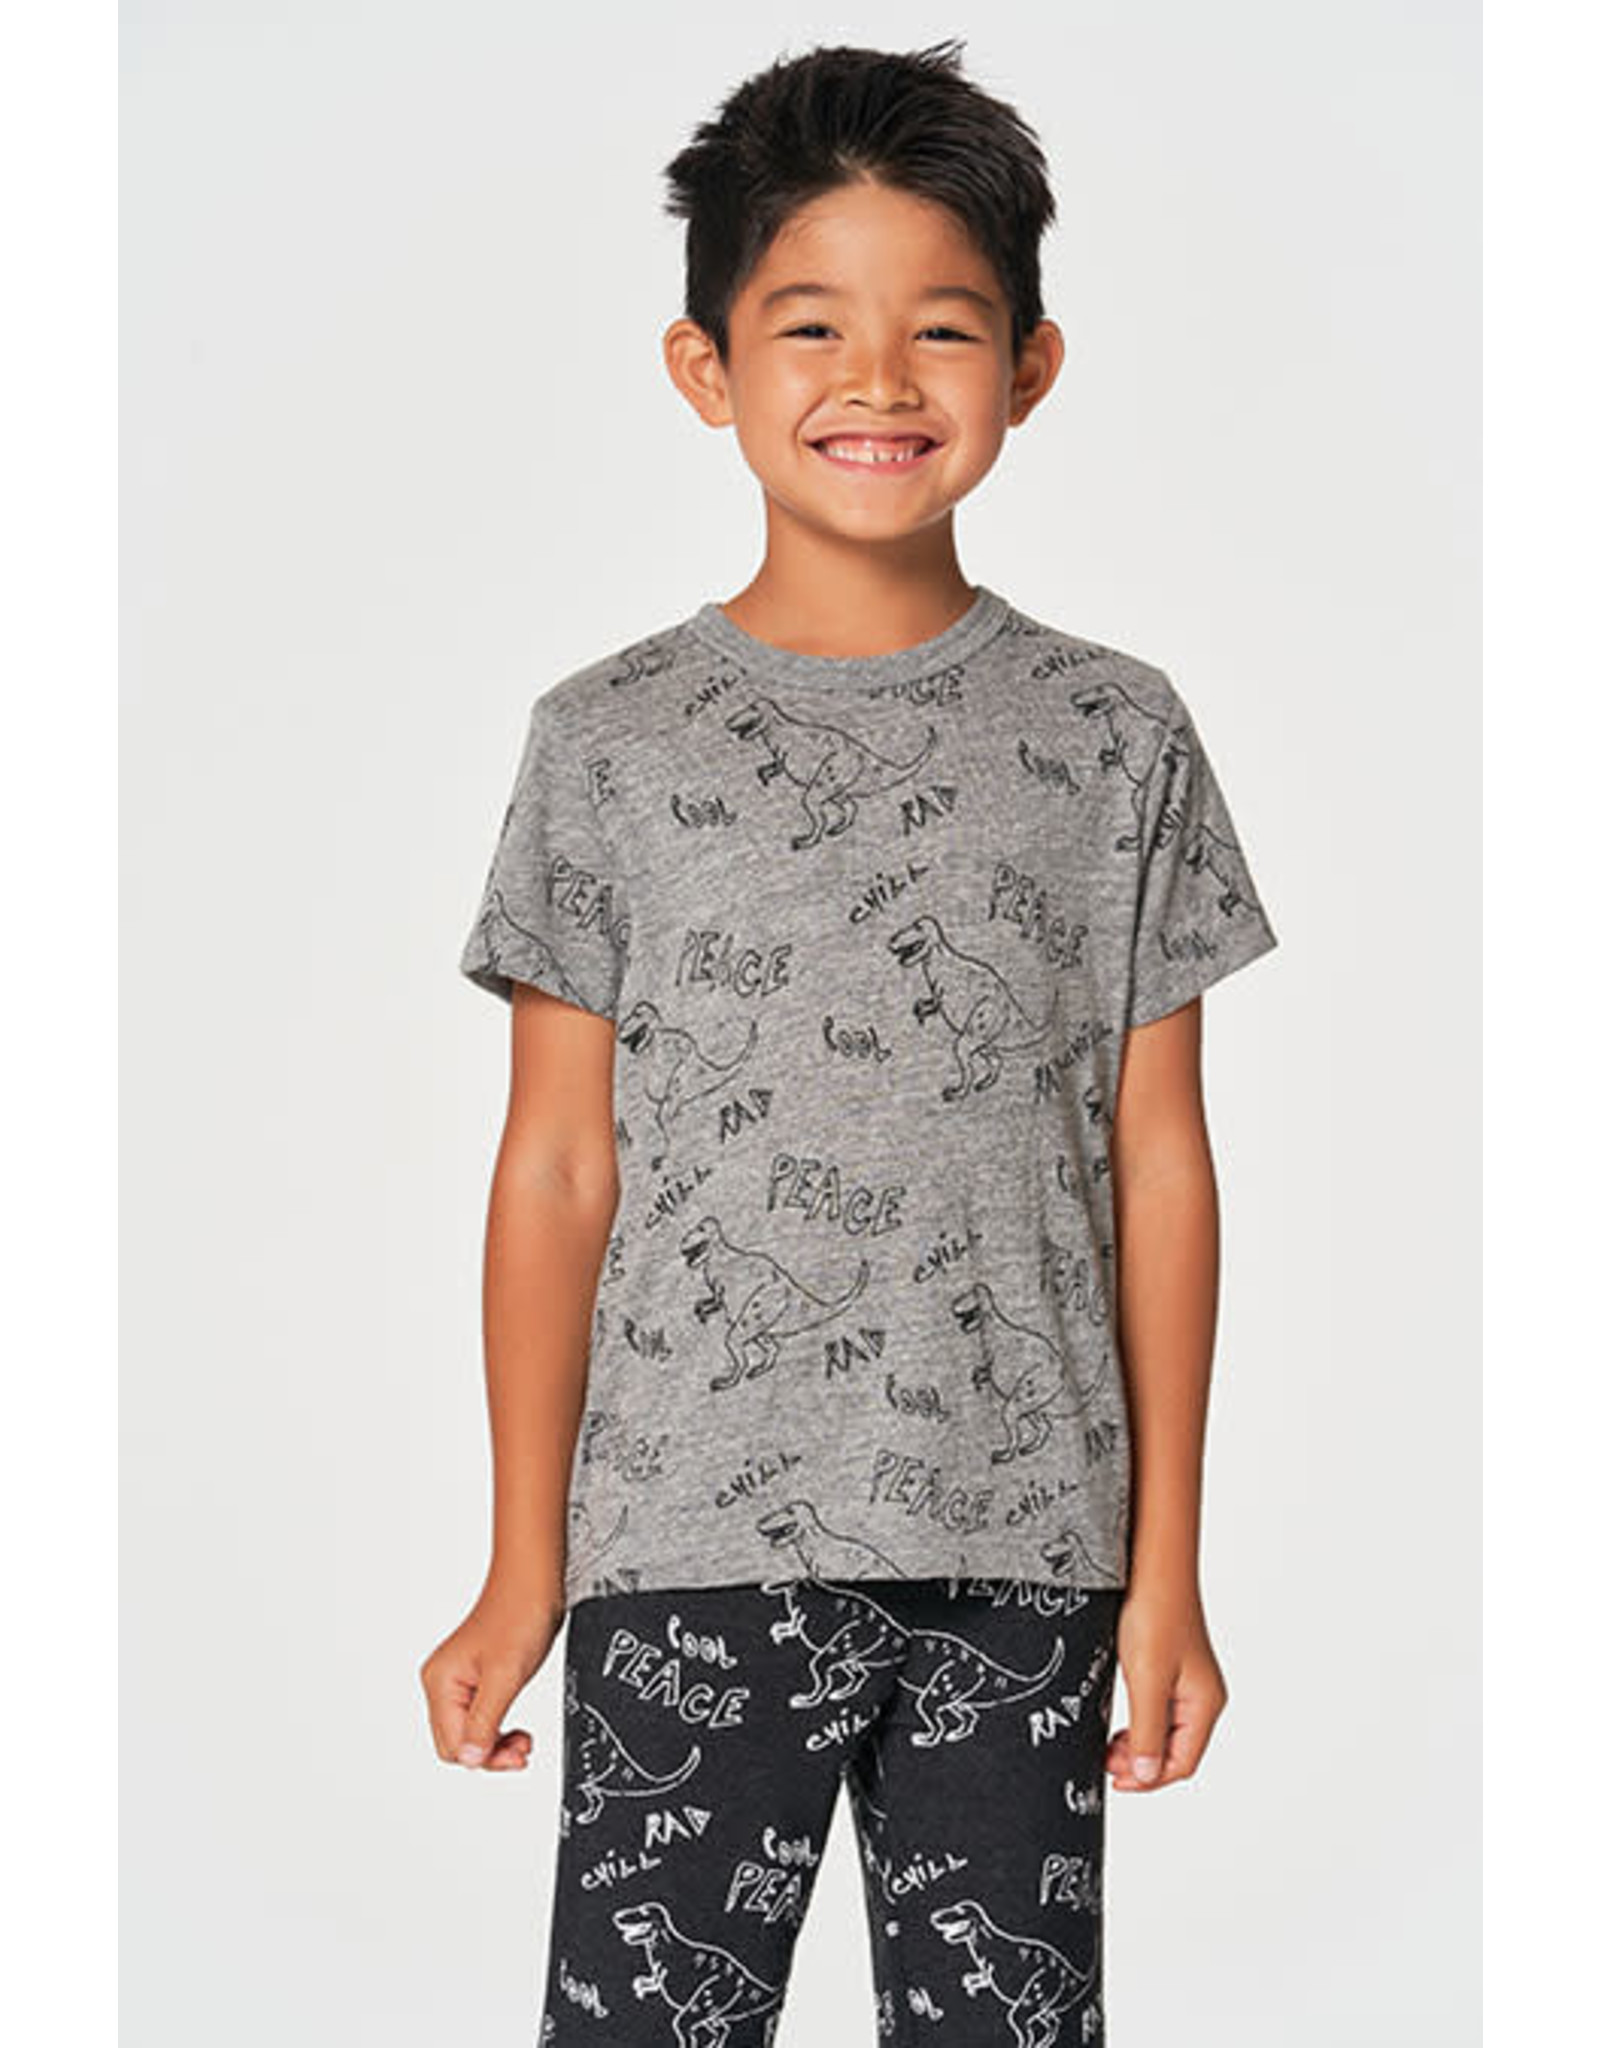 Chaser Chaser Boys Dino Drawings Tee